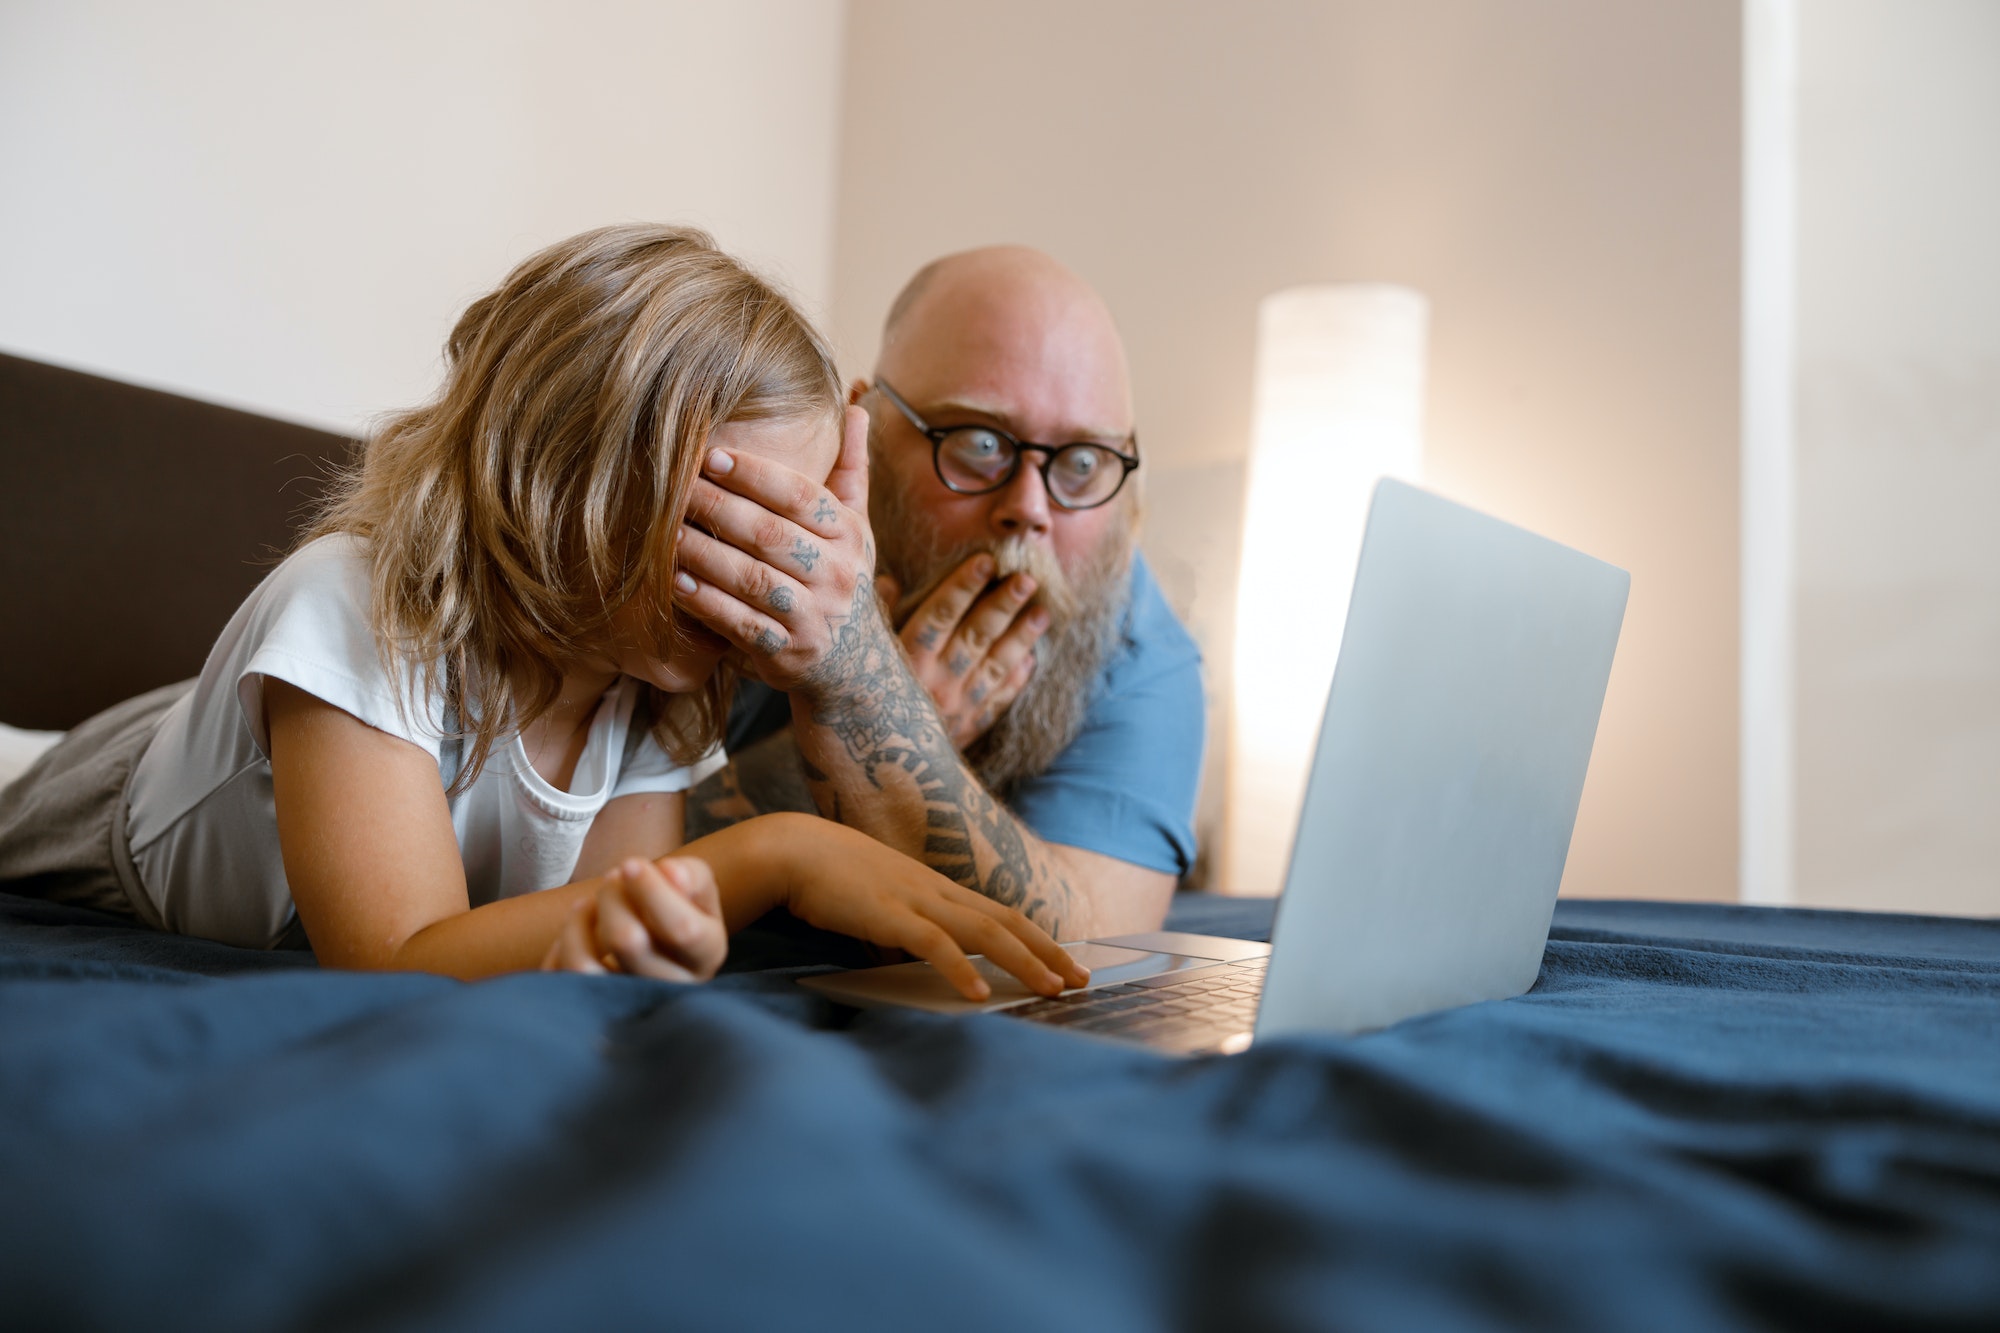 Shocked father closes eyes of daughter to protect from dangerous content on laptop on bed